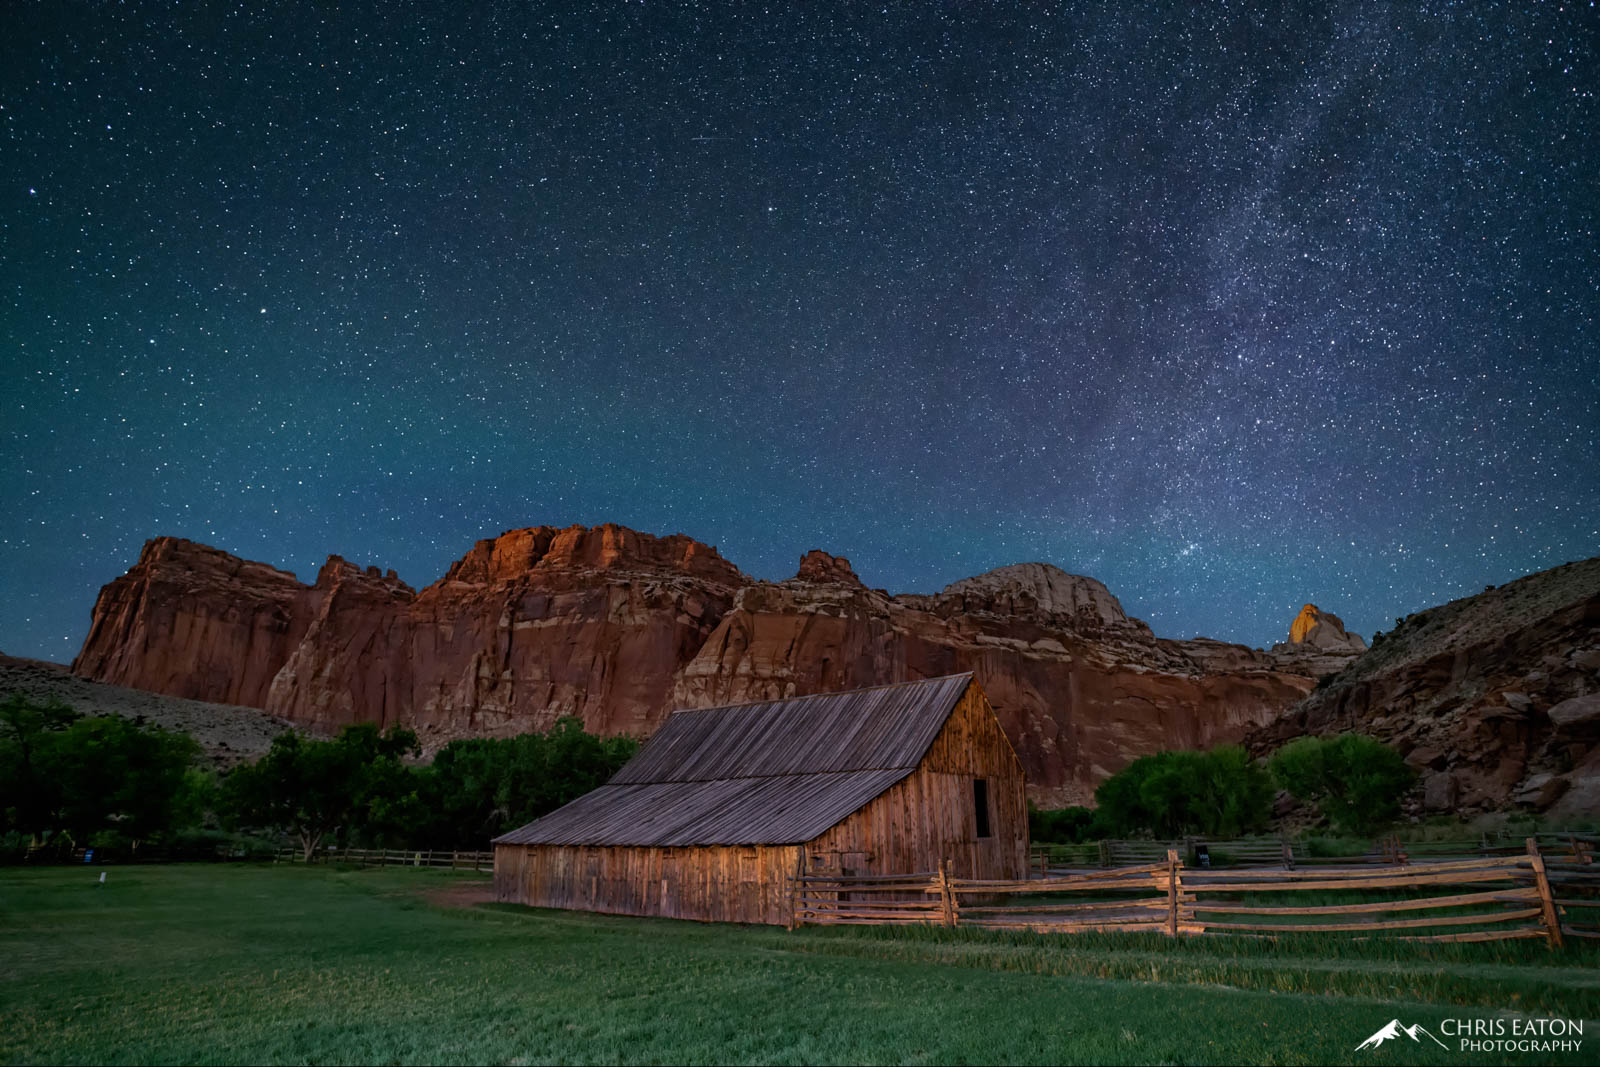 The Milky Way over old horse barn in the Fruita Historic District in Capitol Reef National Park.